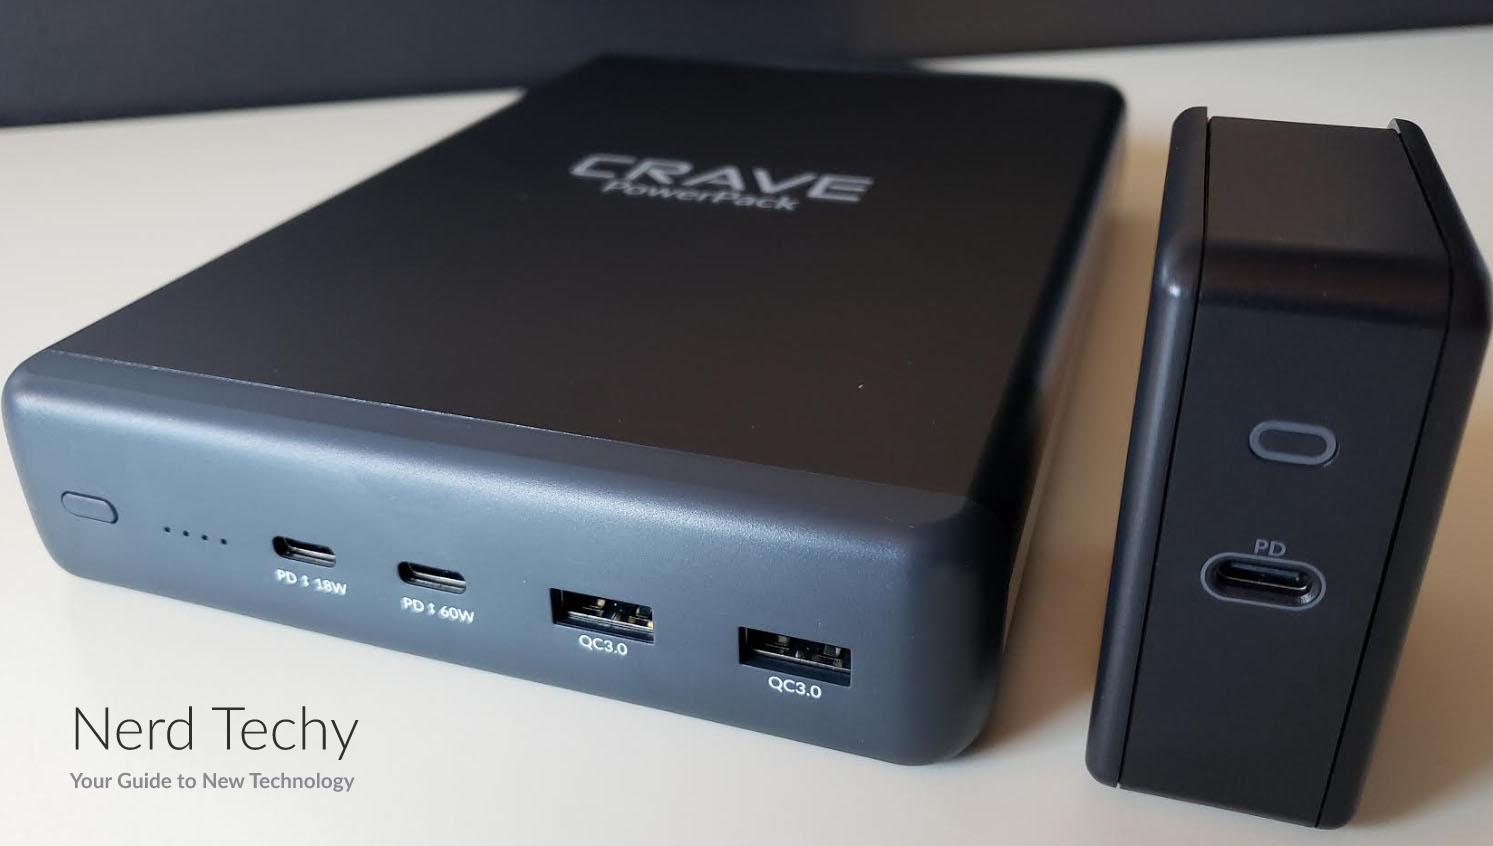 Crave PowerPack 2